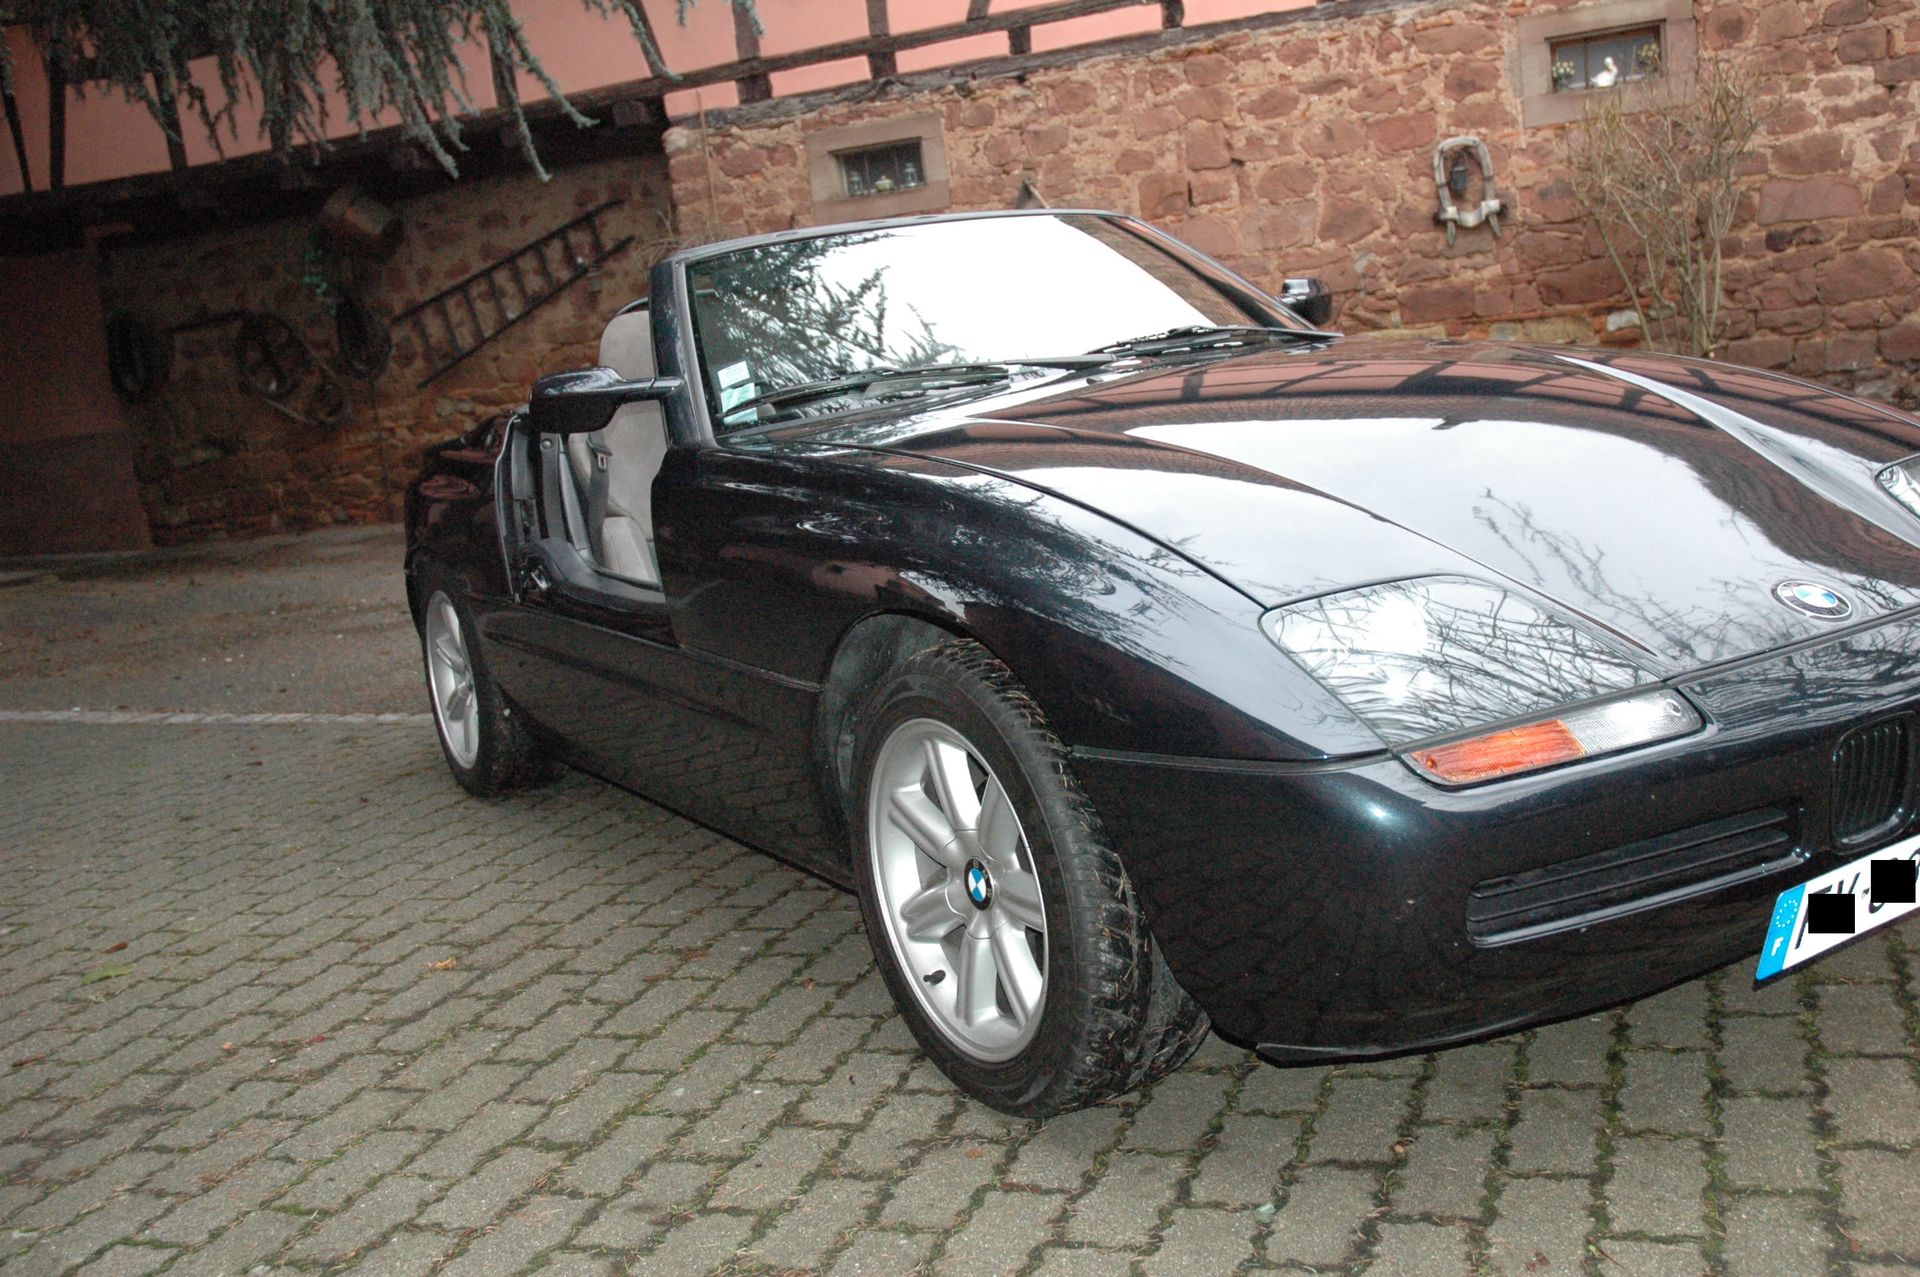 1989 BMW Z1 86868 km original

Technical control OK

French collector's car



T&hellip;